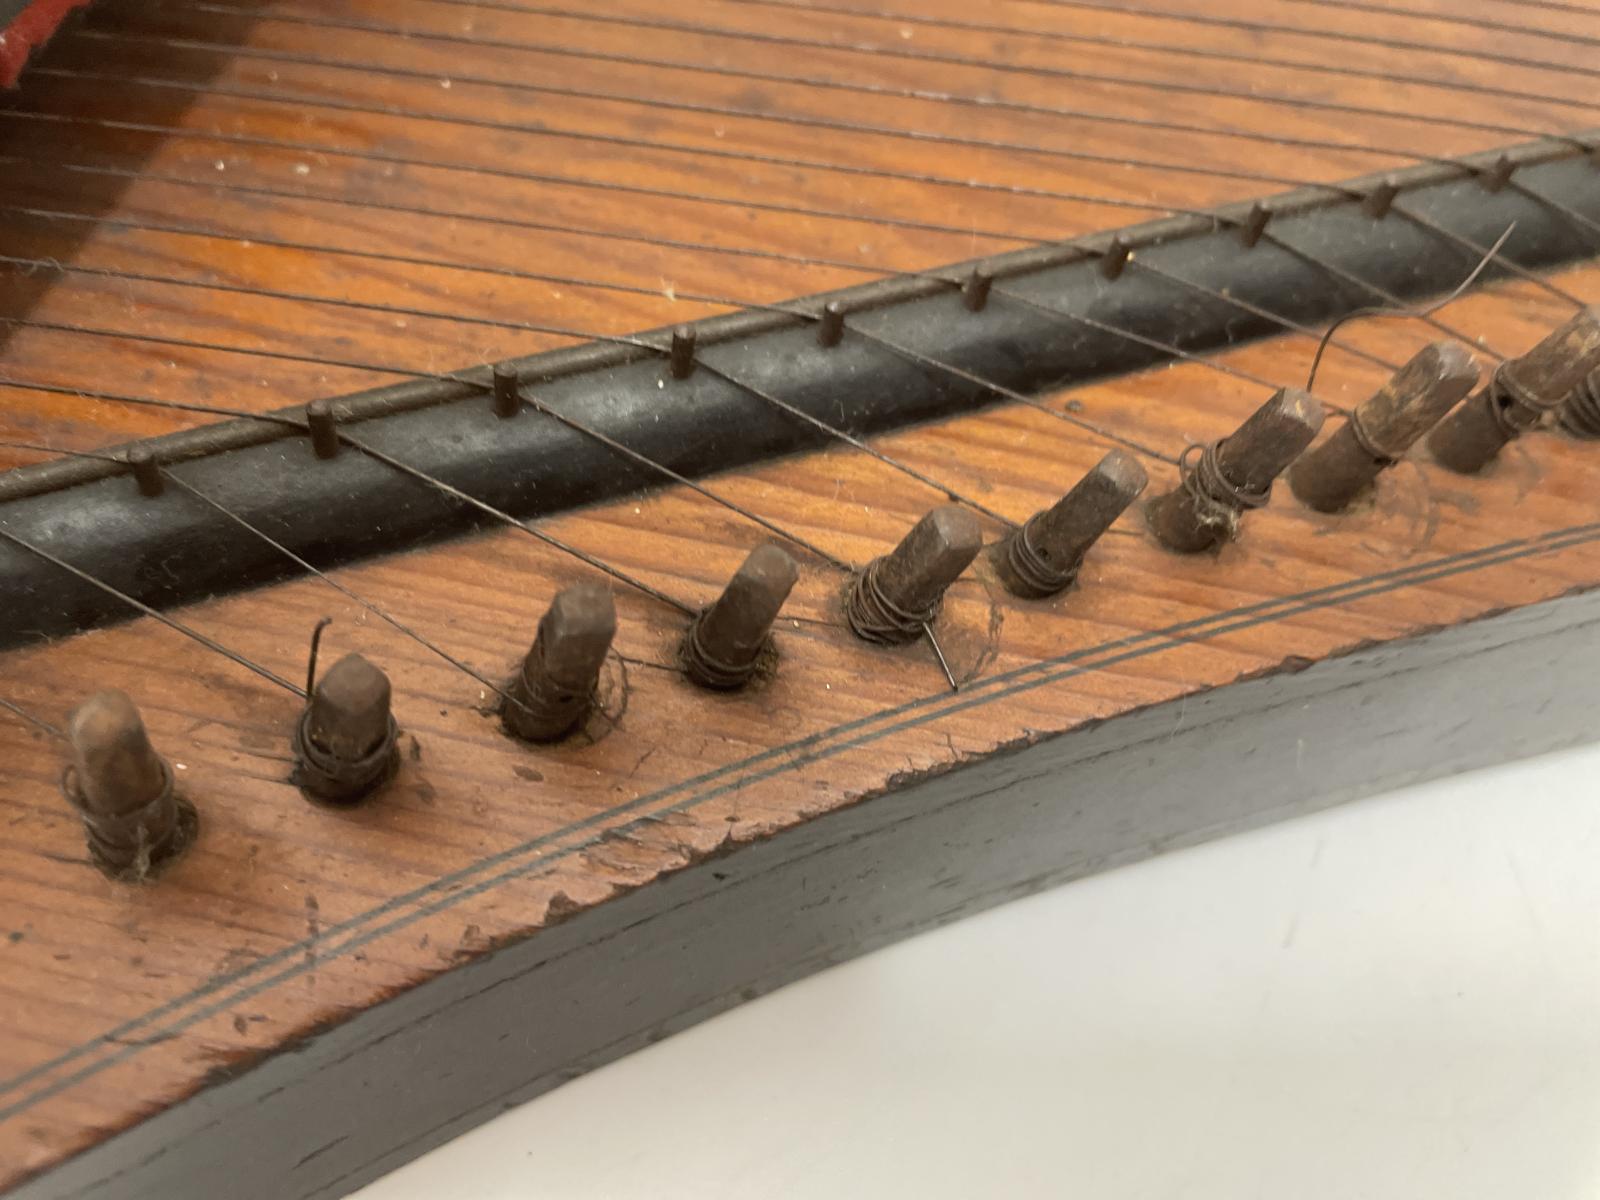 Wooden string tuning pegs on the shaped edge of the Autoharp